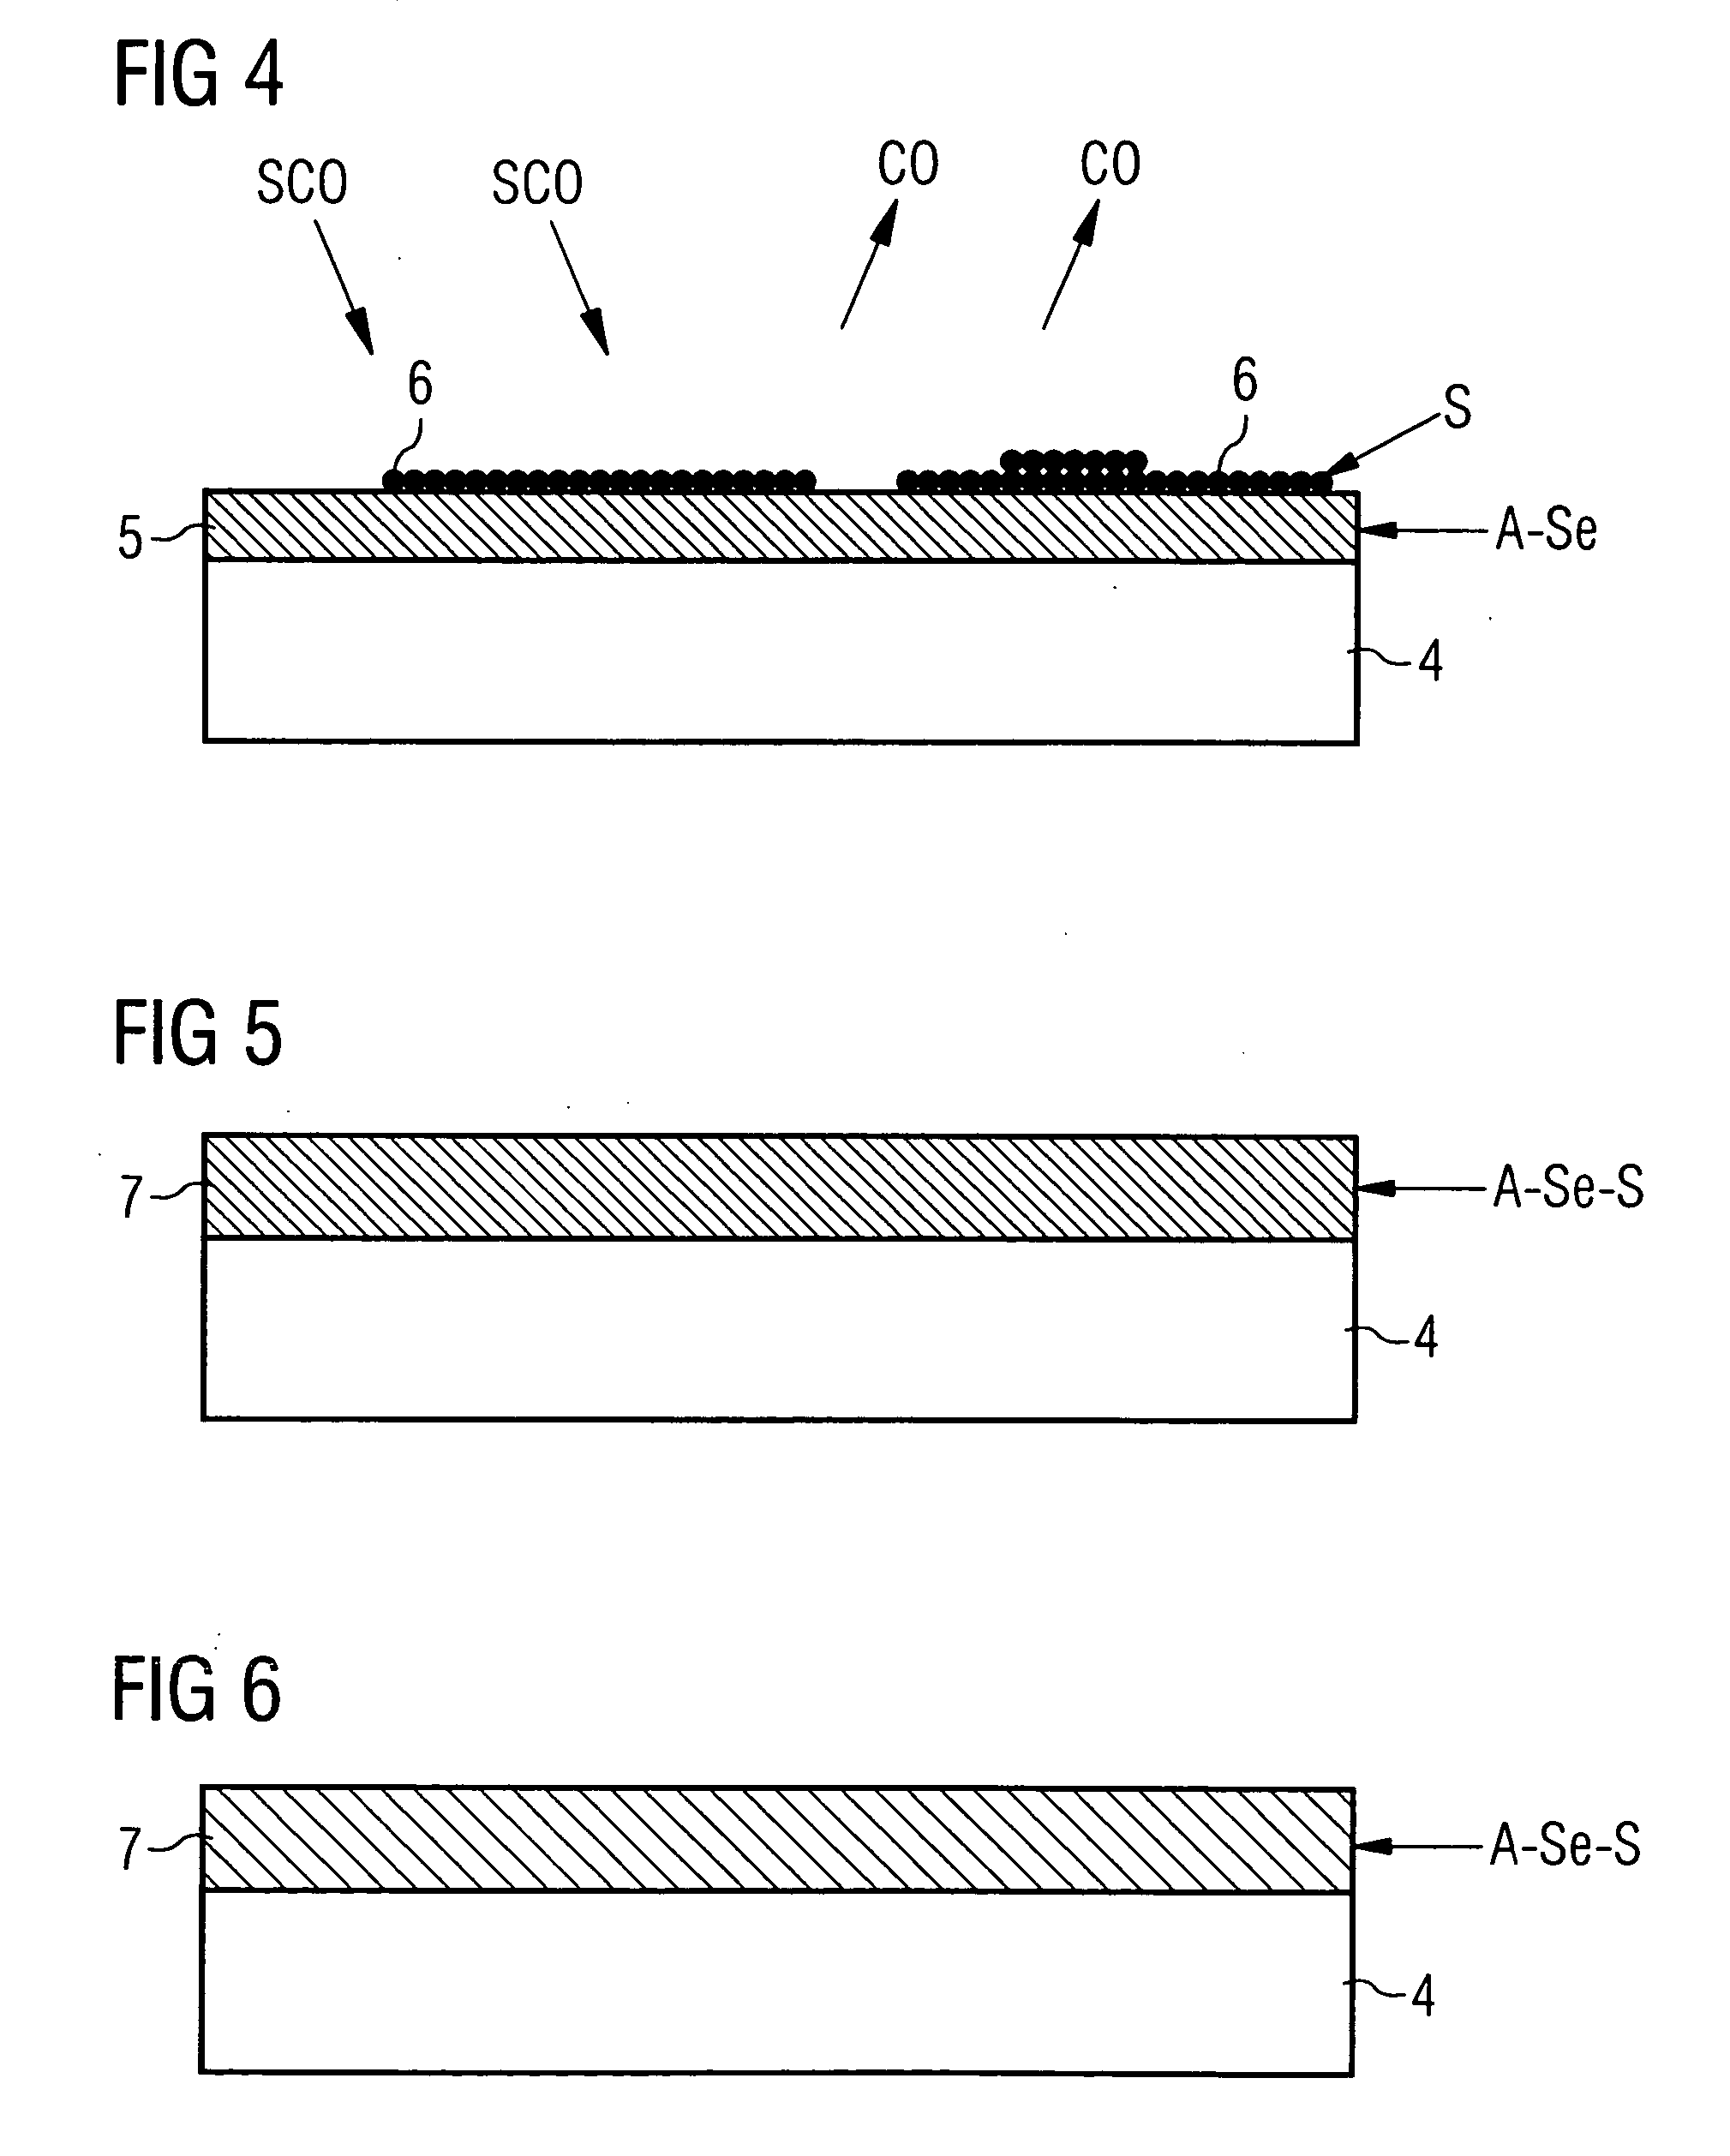 Method for manufacturing an electrolyte material layer in semiconductor memory devices